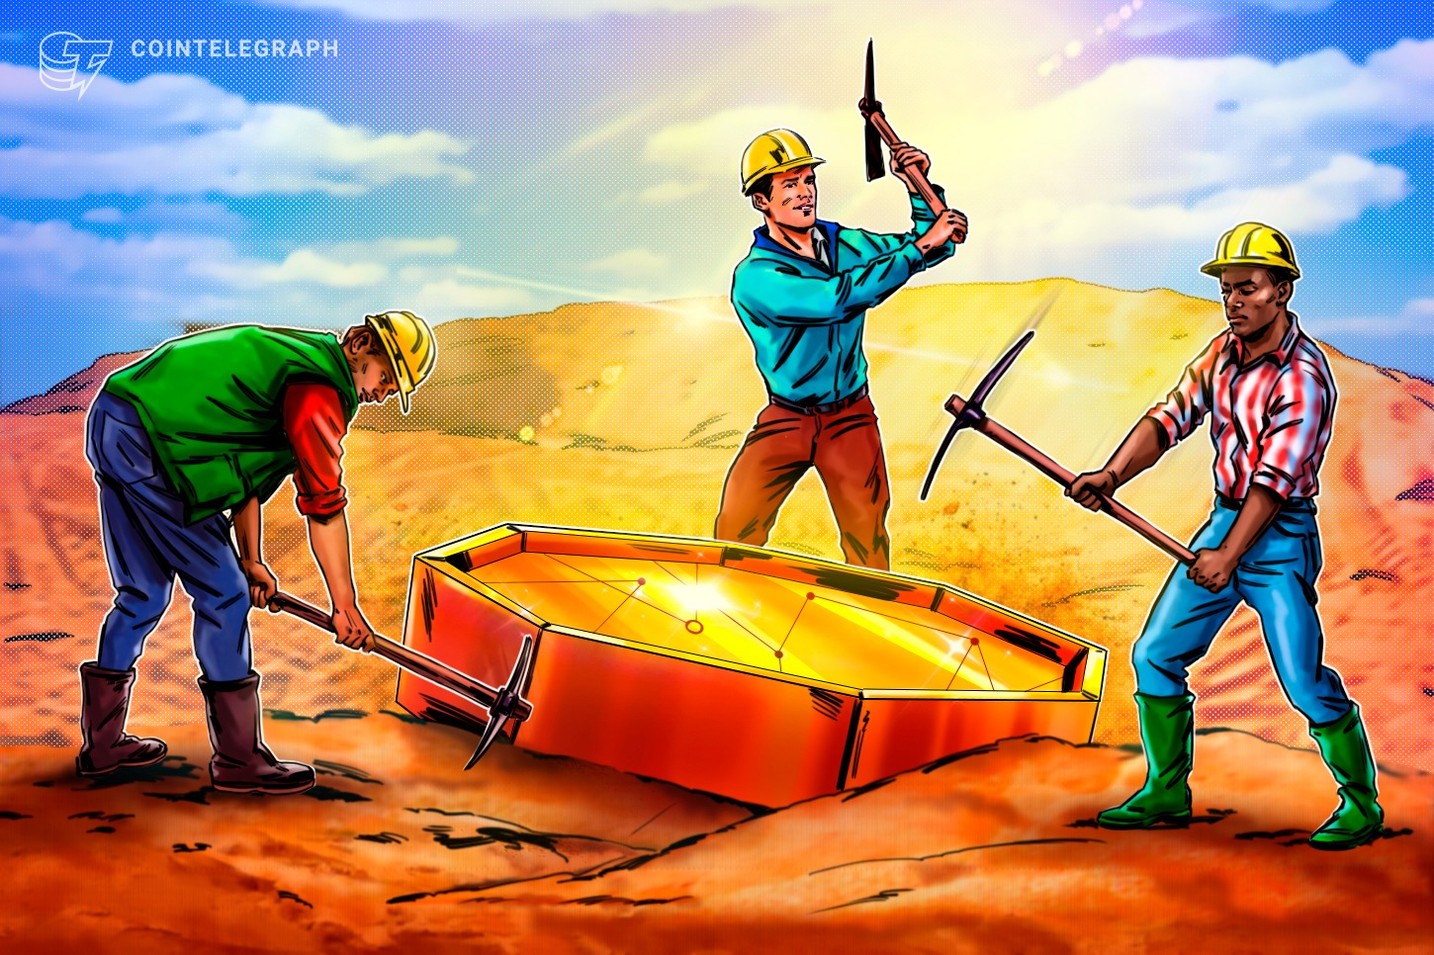 Texas lawmaker introduces resolution to protect Bitcoin miners and HODLers